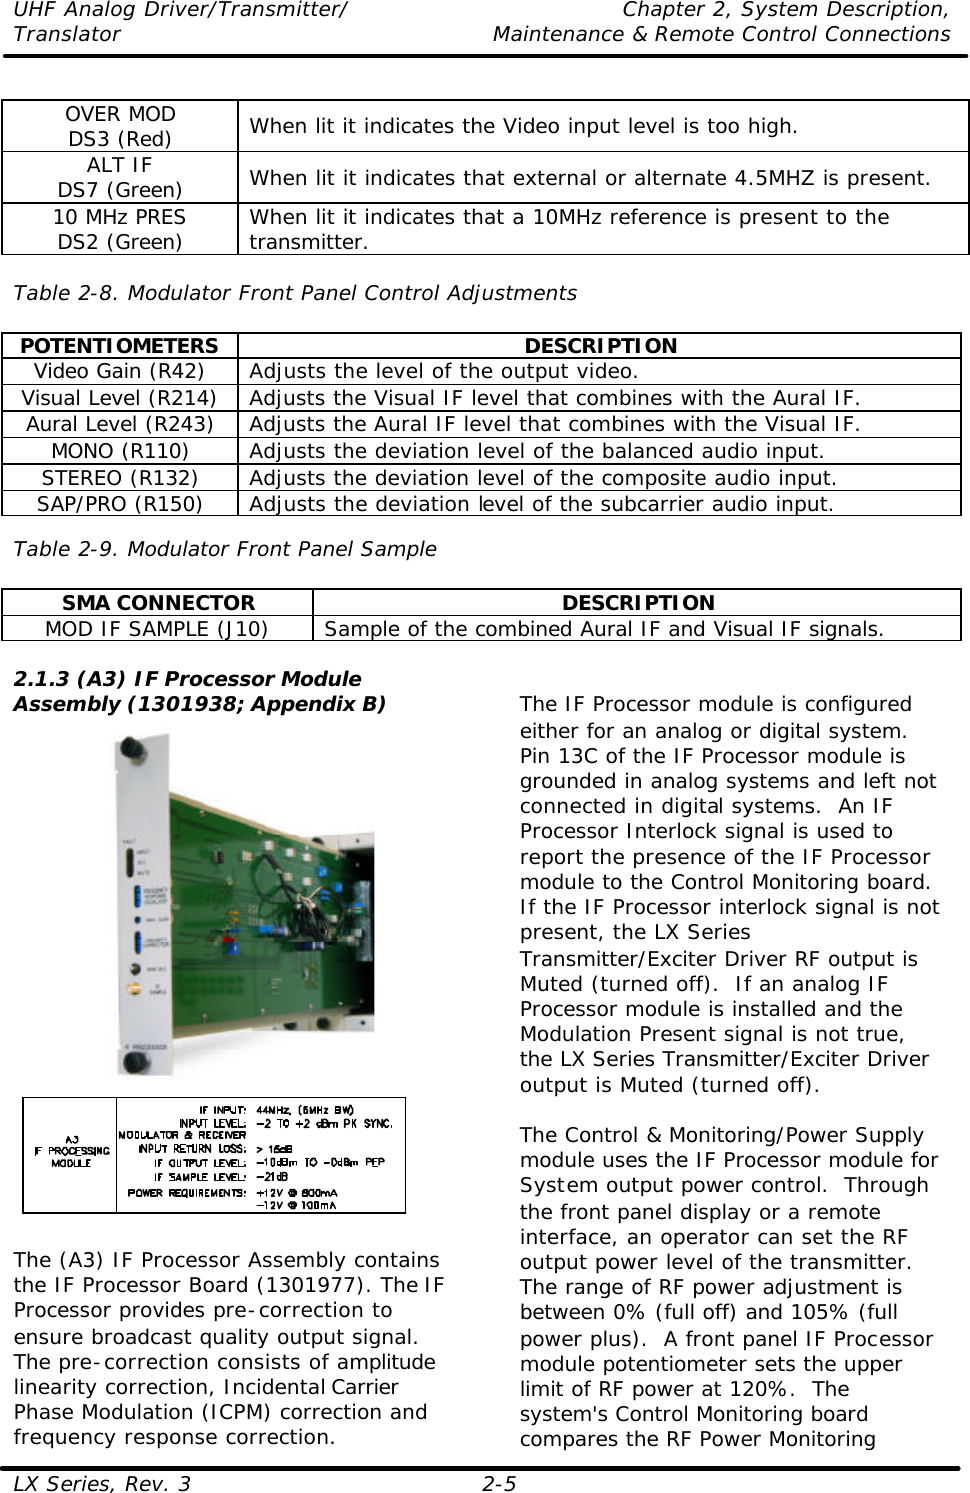 UHF Analog Driver/Transmitter/ Chapter 2, System Description, Translator Maintenance &amp; Remote Control Connections LX Series, Rev. 3 2-5 OVER MOD DS3 (Red) When lit it indicates the Video input level is too high. ALT IF DS7 (Green) When lit it indicates that external or alternate 4.5MHZ is present. 10 MHz PRES DS2 (Green) When lit it indicates that a 10MHz reference is present to the transmitter.  Table 2-8. Modulator Front Panel Control Adjustments  POTENTIOMETERS DESCRIPTION Video Gain (R42) Adjusts the level of the output video. Visual Level (R214) Adjusts the Visual IF level that combines with the Aural IF. Aural Level (R243) Adjusts the Aural IF level that combines with the Visual IF. MONO (R110) Adjusts the deviation level of the balanced audio input. STEREO (R132) Adjusts the deviation level of the composite audio input. SAP/PRO (R150) Adjusts the deviation level of the subcarrier audio input.  Table 2-9. Modulator Front Panel Sample  SMA CONNECTOR DESCRIPTION MOD IF SAMPLE (J10) Sample of the combined Aural IF and Visual IF signals.  2.1.3 (A3) IF Processor Module Assembly (1301938; Appendix B)    The (A3) IF Processor Assembly contains the IF Processor Board (1301977). The IF Processor provides pre-correction to ensure broadcast quality output signal. The pre-correction consists of amplitude linearity correction, Incidental Carrier Phase Modulation (ICPM) correction and frequency response correction.  The IF Processor module is configured either for an analog or digital system.  Pin 13C of the IF Processor module is grounded in analog systems and left not connected in digital systems.  An IF Processor Interlock signal is used to report the presence of the IF Processor module to the Control Monitoring board.  If the IF Processor interlock signal is not present, the LX Series Transmitter/Exciter Driver RF output is Muted (turned off).  If an analog IF Processor module is installed and the Modulation Present signal is not true, the LX Series Transmitter/Exciter Driver output is Muted (turned off).  The Control &amp; Monitoring/Power Supply module uses the IF Processor module for System output power control.  Through the front panel display or a remote interface, an operator can set the RF output power level of the transmitter.  The range of RF power adjustment is between 0% (full off) and 105% (full power plus).  A front panel IF Processor module potentiometer sets the upper limit of RF power at 120%.  The system&apos;s Control Monitoring board compares the RF Power Monitoring 